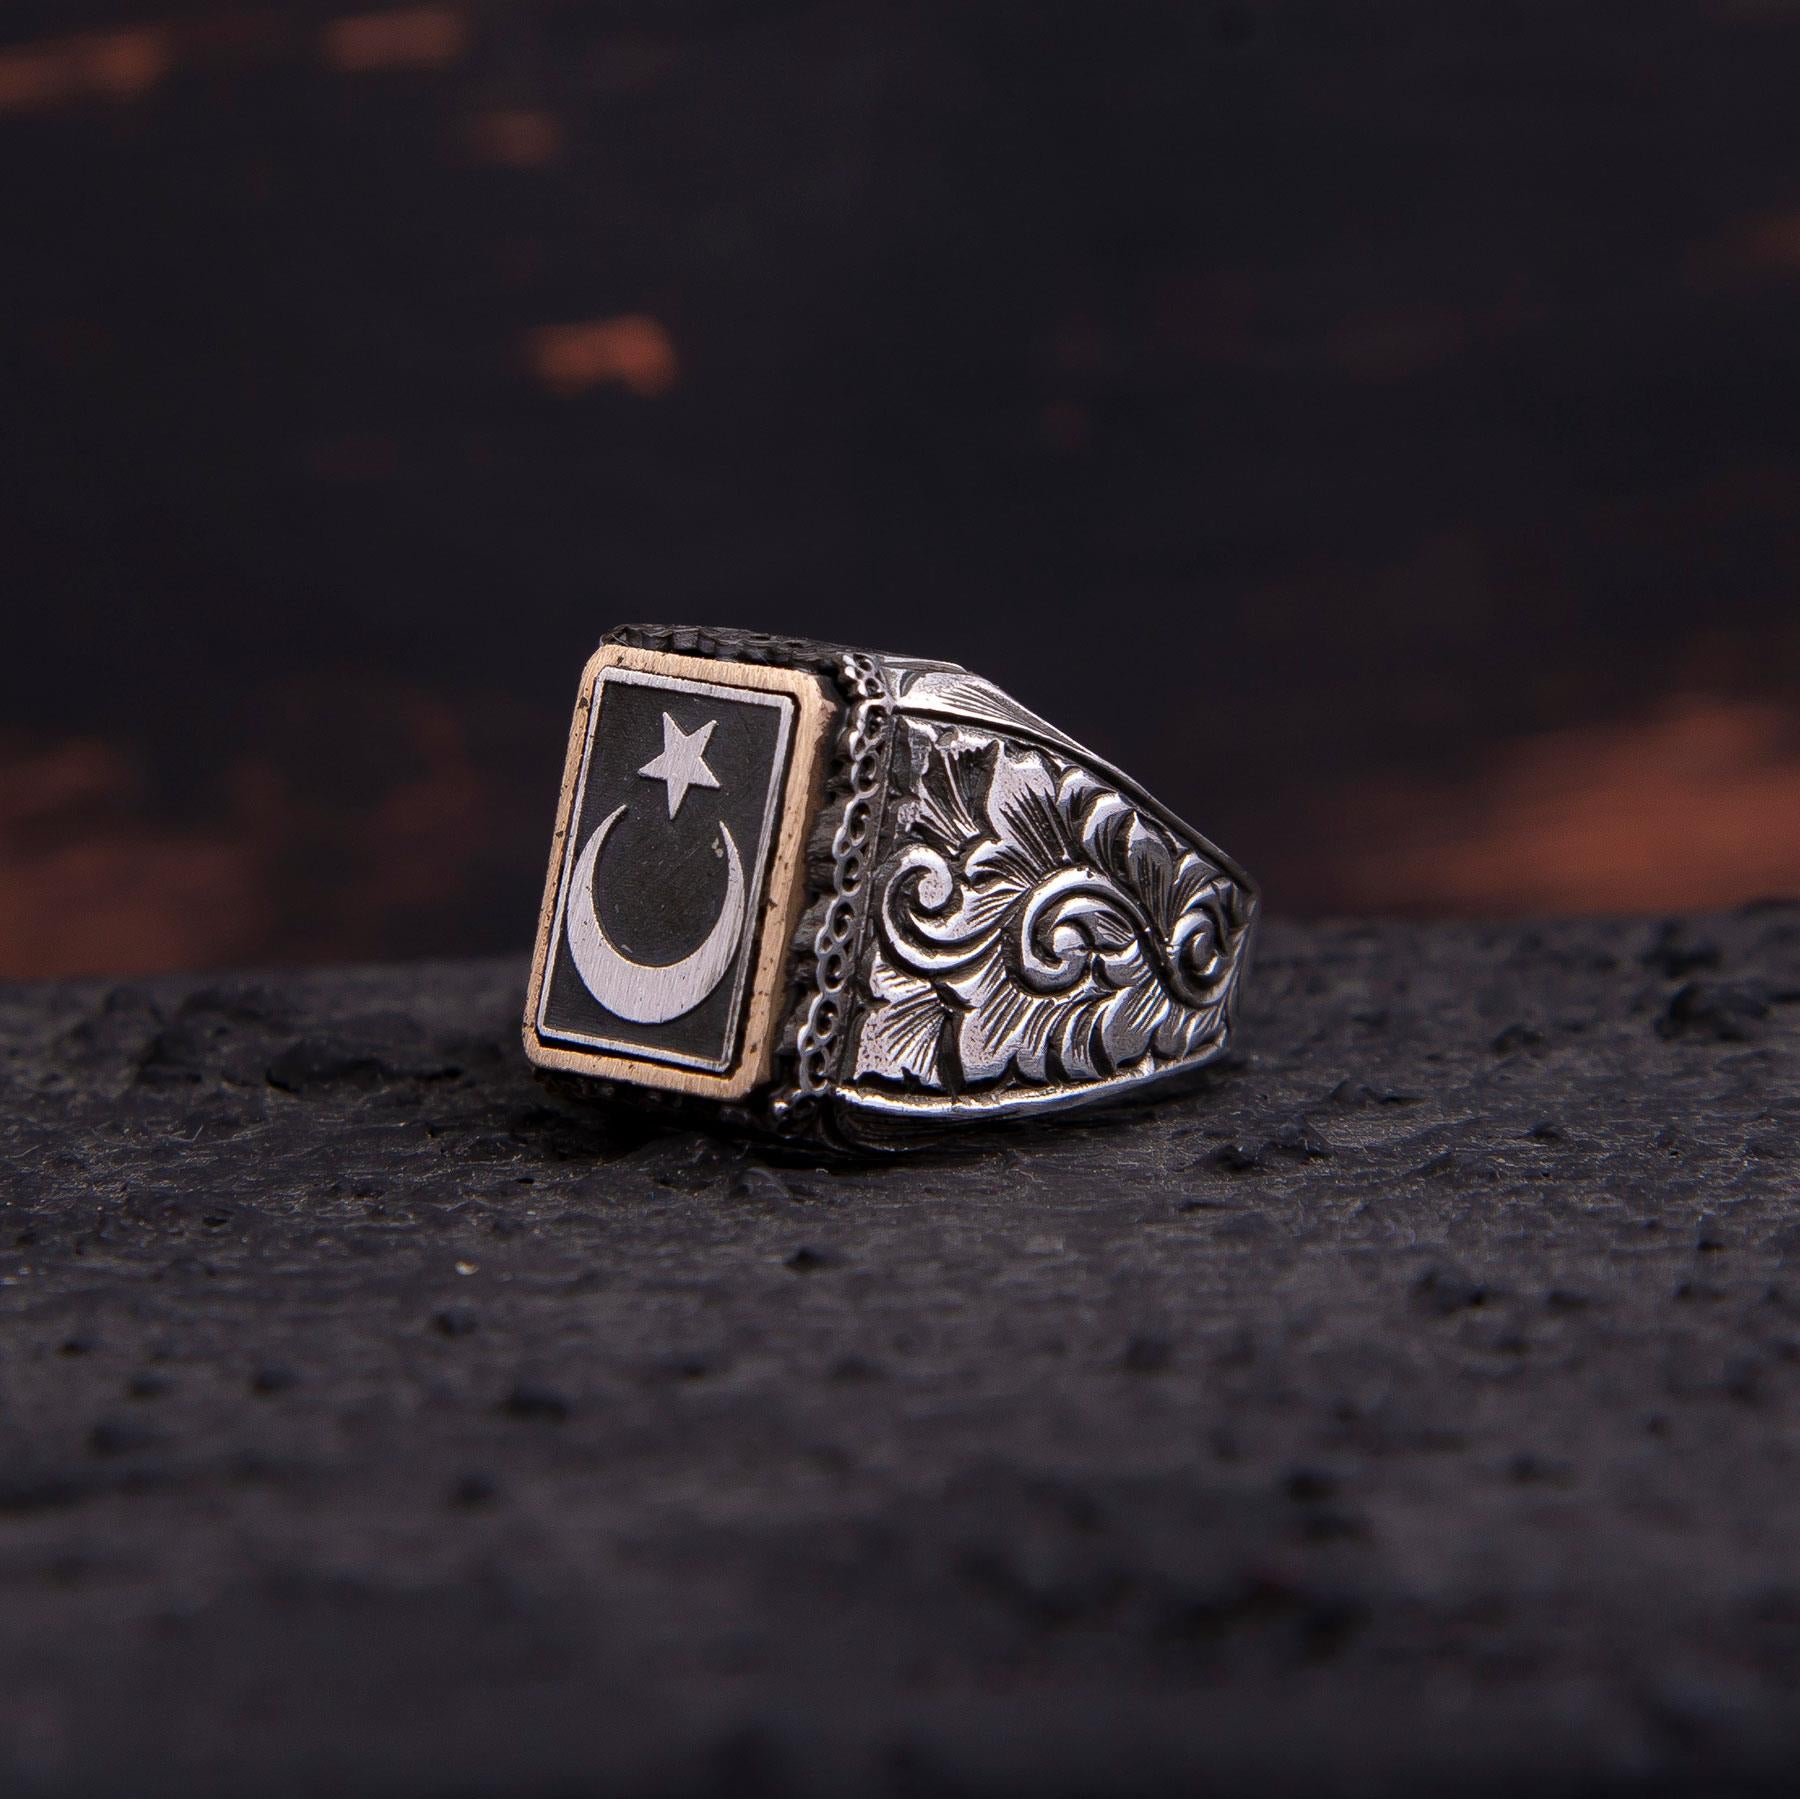 Engraving Patterned Star and Crescent Small Silver Men's Ring 1